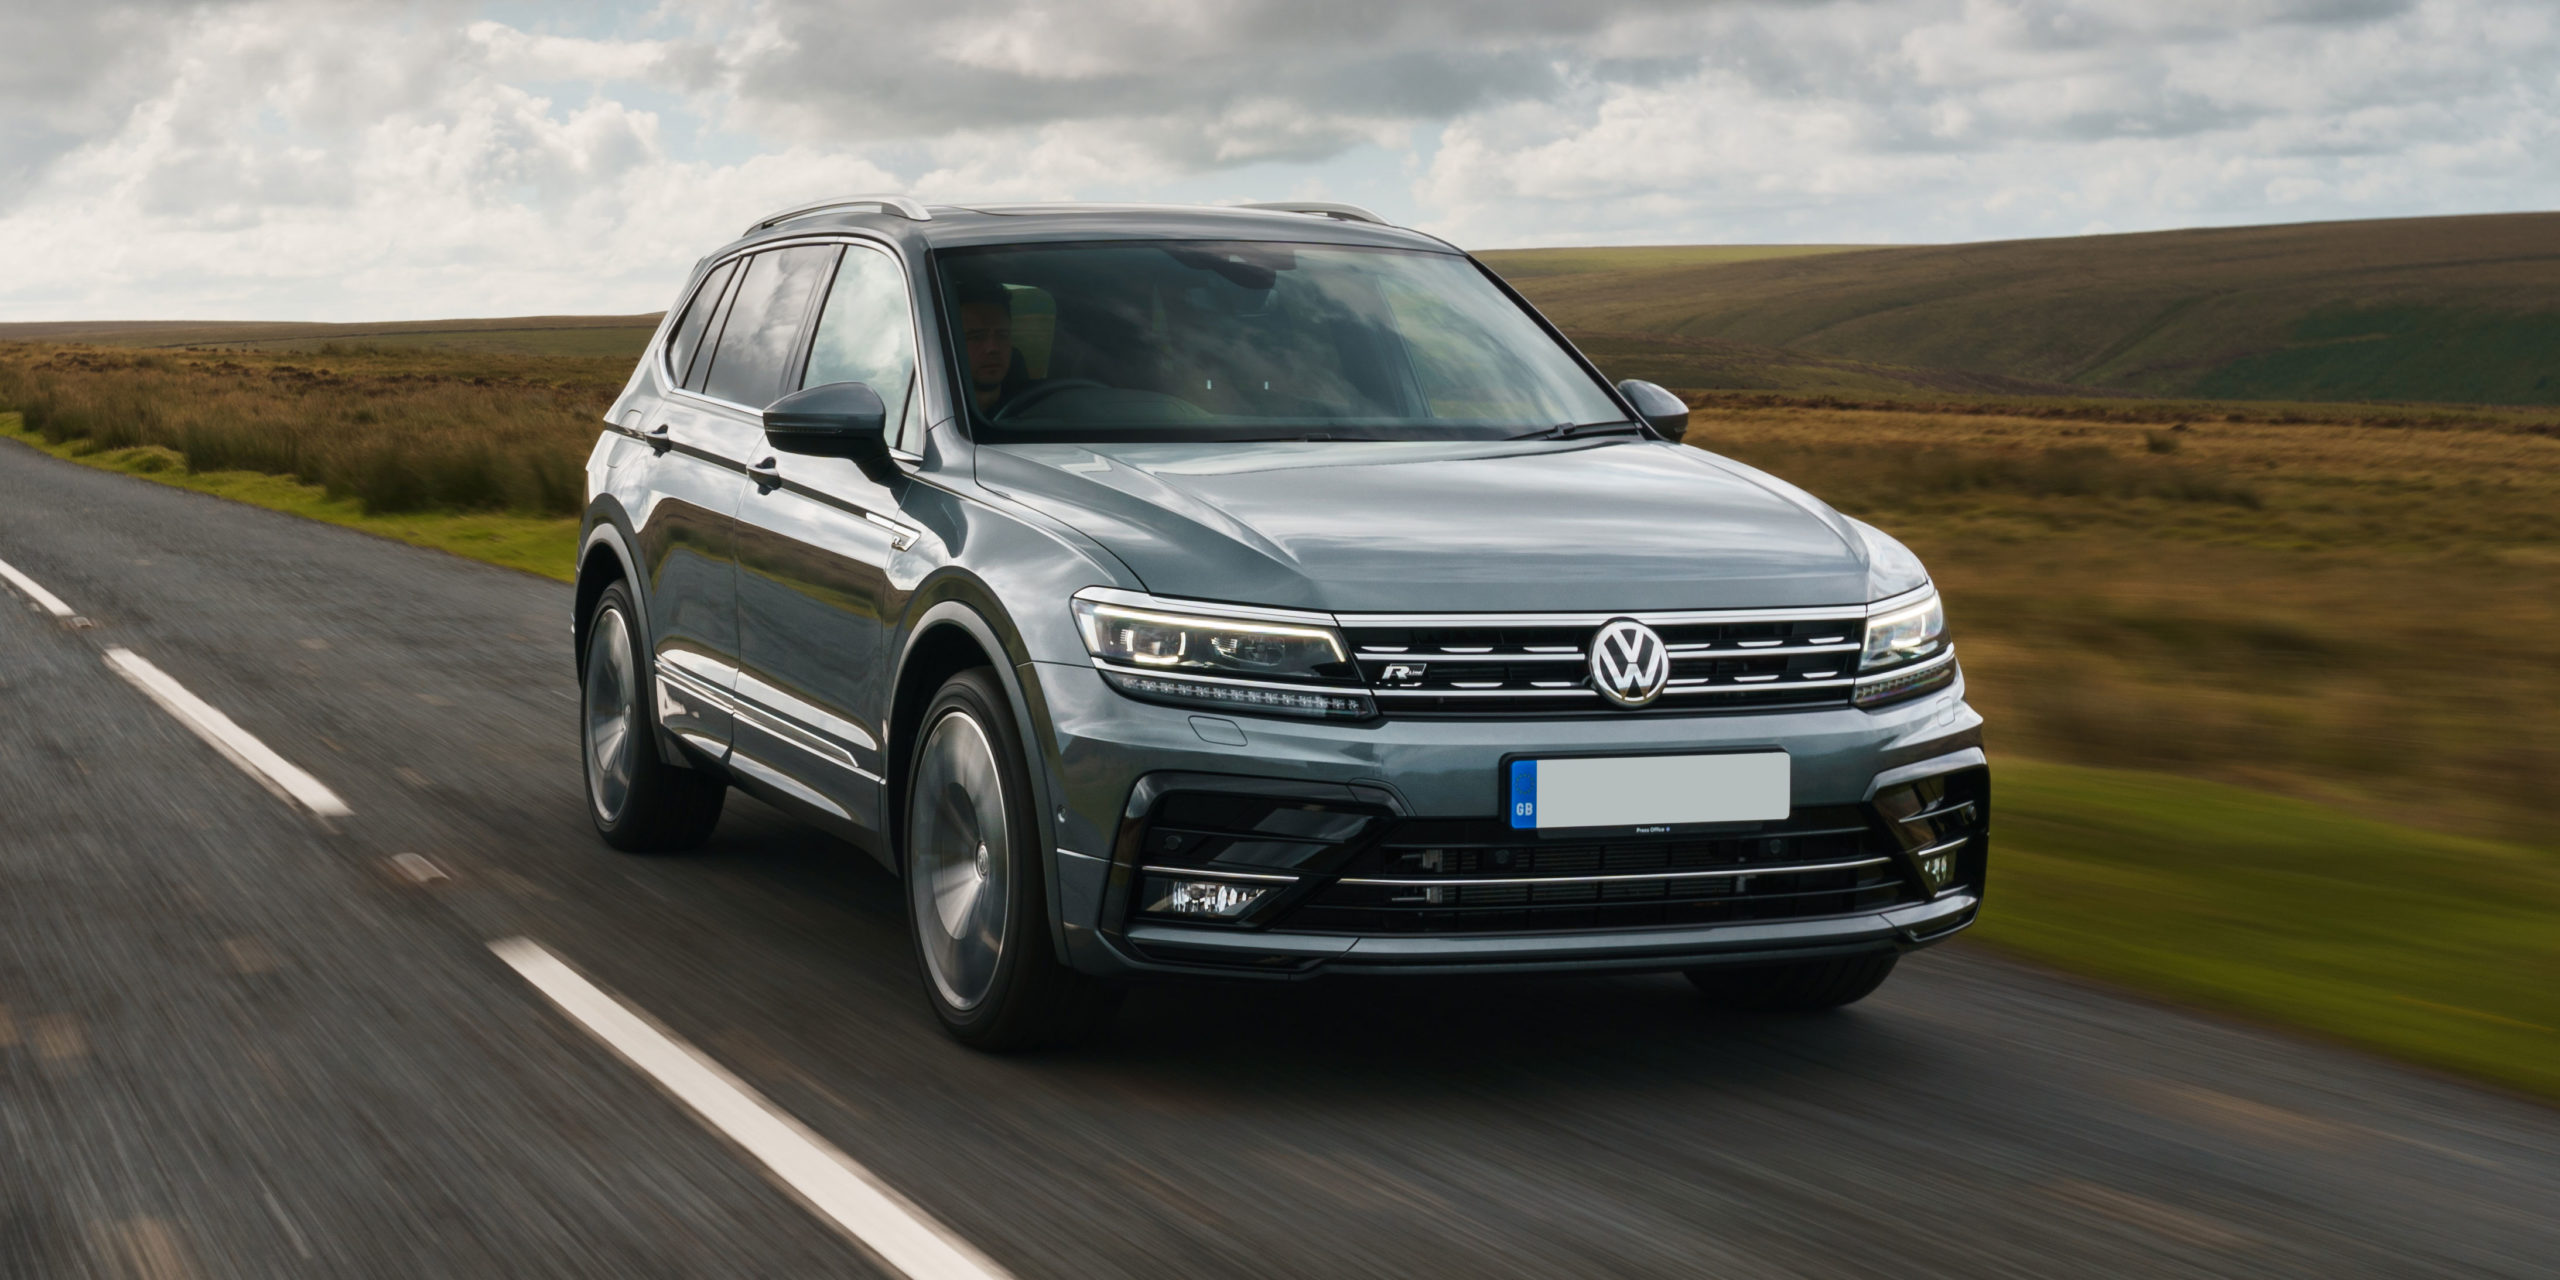 https://carwow-uk-wp-3.imgix.net/Tiguan-Allspace-driving-front-scaled.jpg